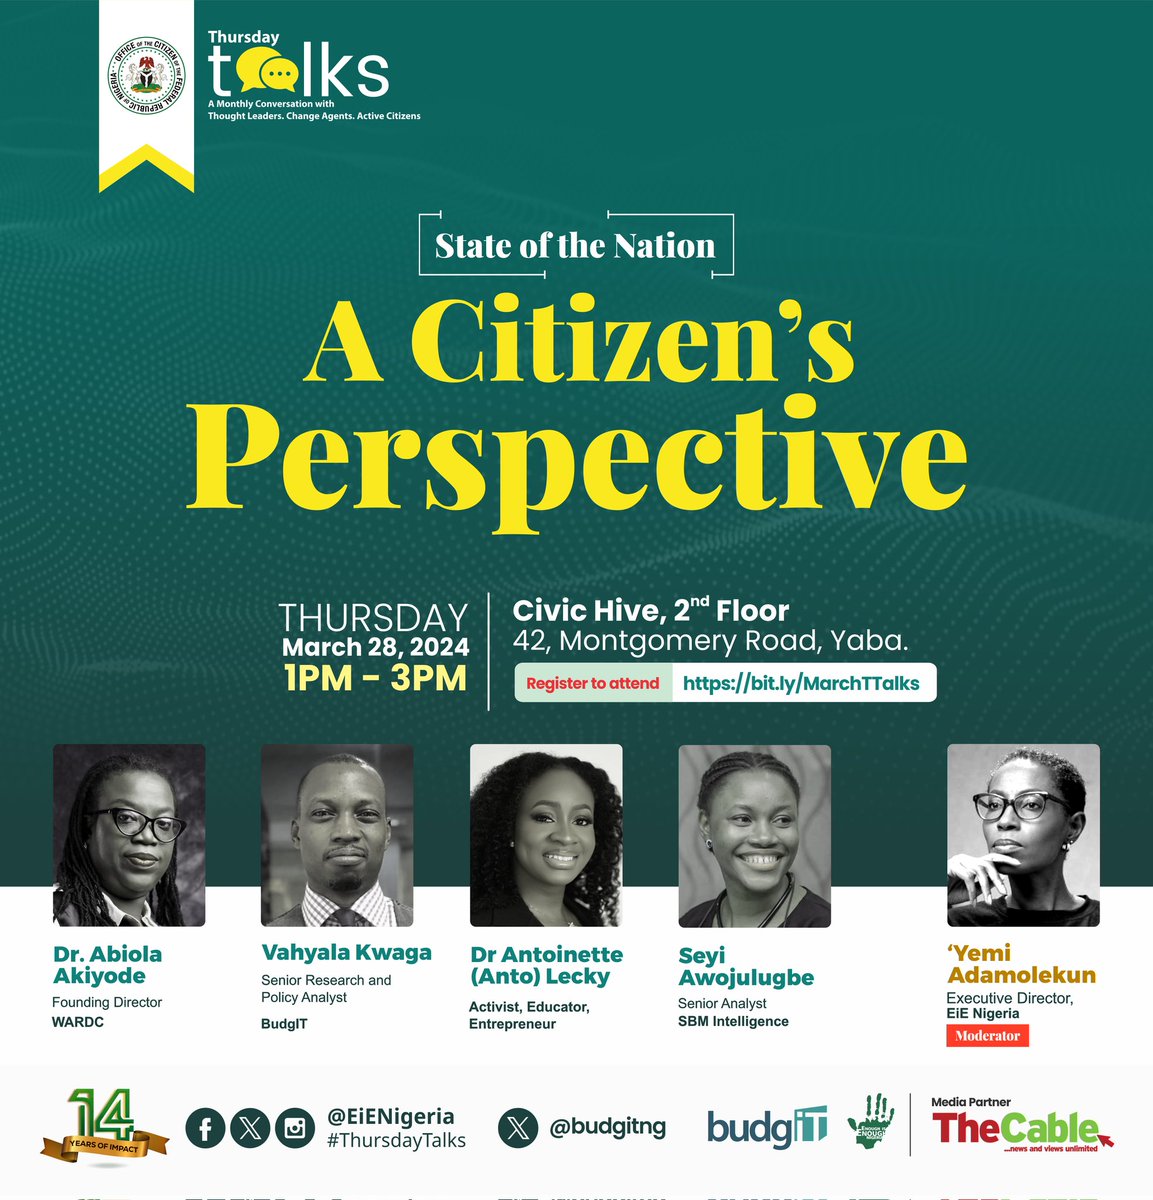 State of the Nation: A Citizen's Perspective on March 28, 1pm to mark our 14th anniversary. Speakers: @AntoLecky @abiolaak, @Its_Oluseyi, @thegrey8. Moderated by @_yemia. Venue: 42, Montgomery Rd, Yaba. Register: bit.ly/MarchTTalks #ThursdayTalks #EiEat14